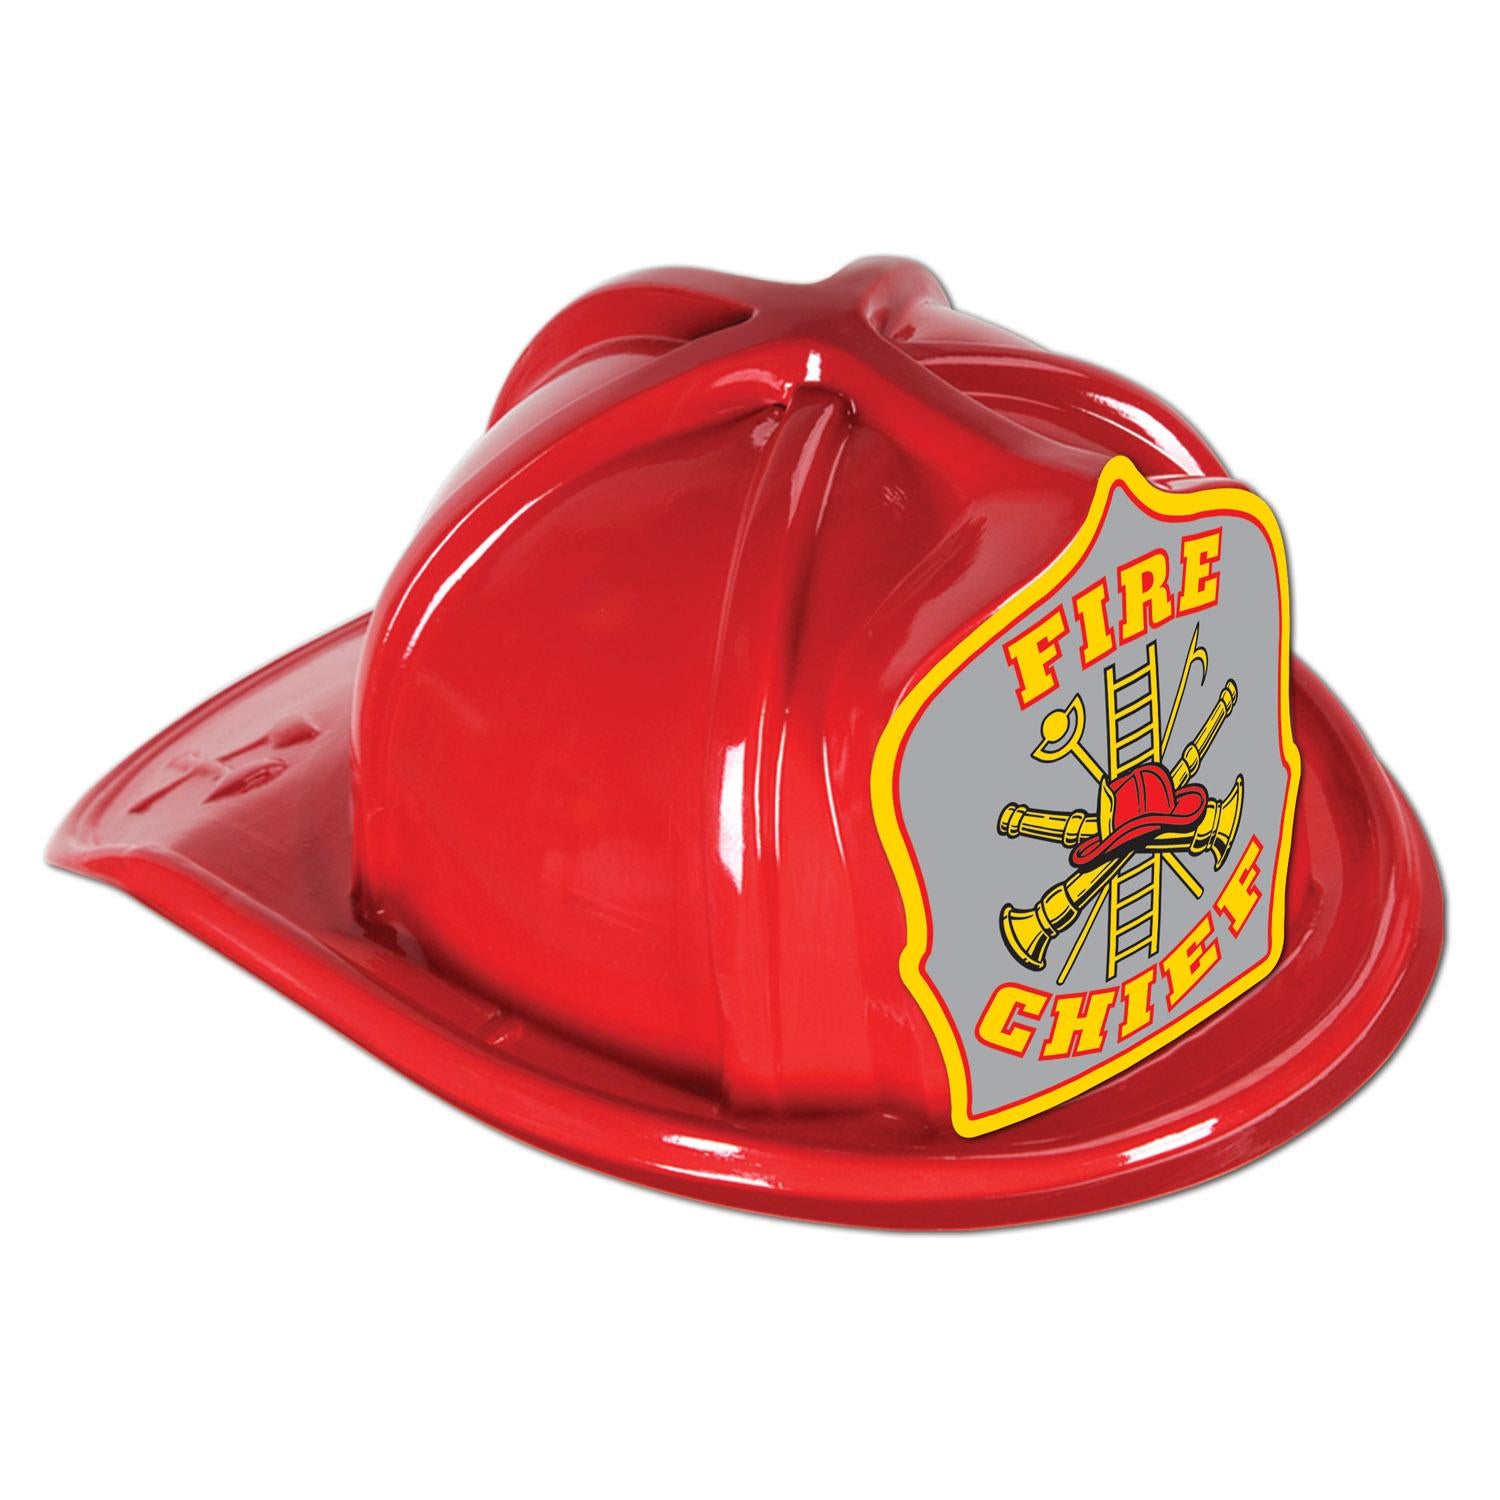 Beistle Red Plastic Fire Chief Hat with Silver Shield